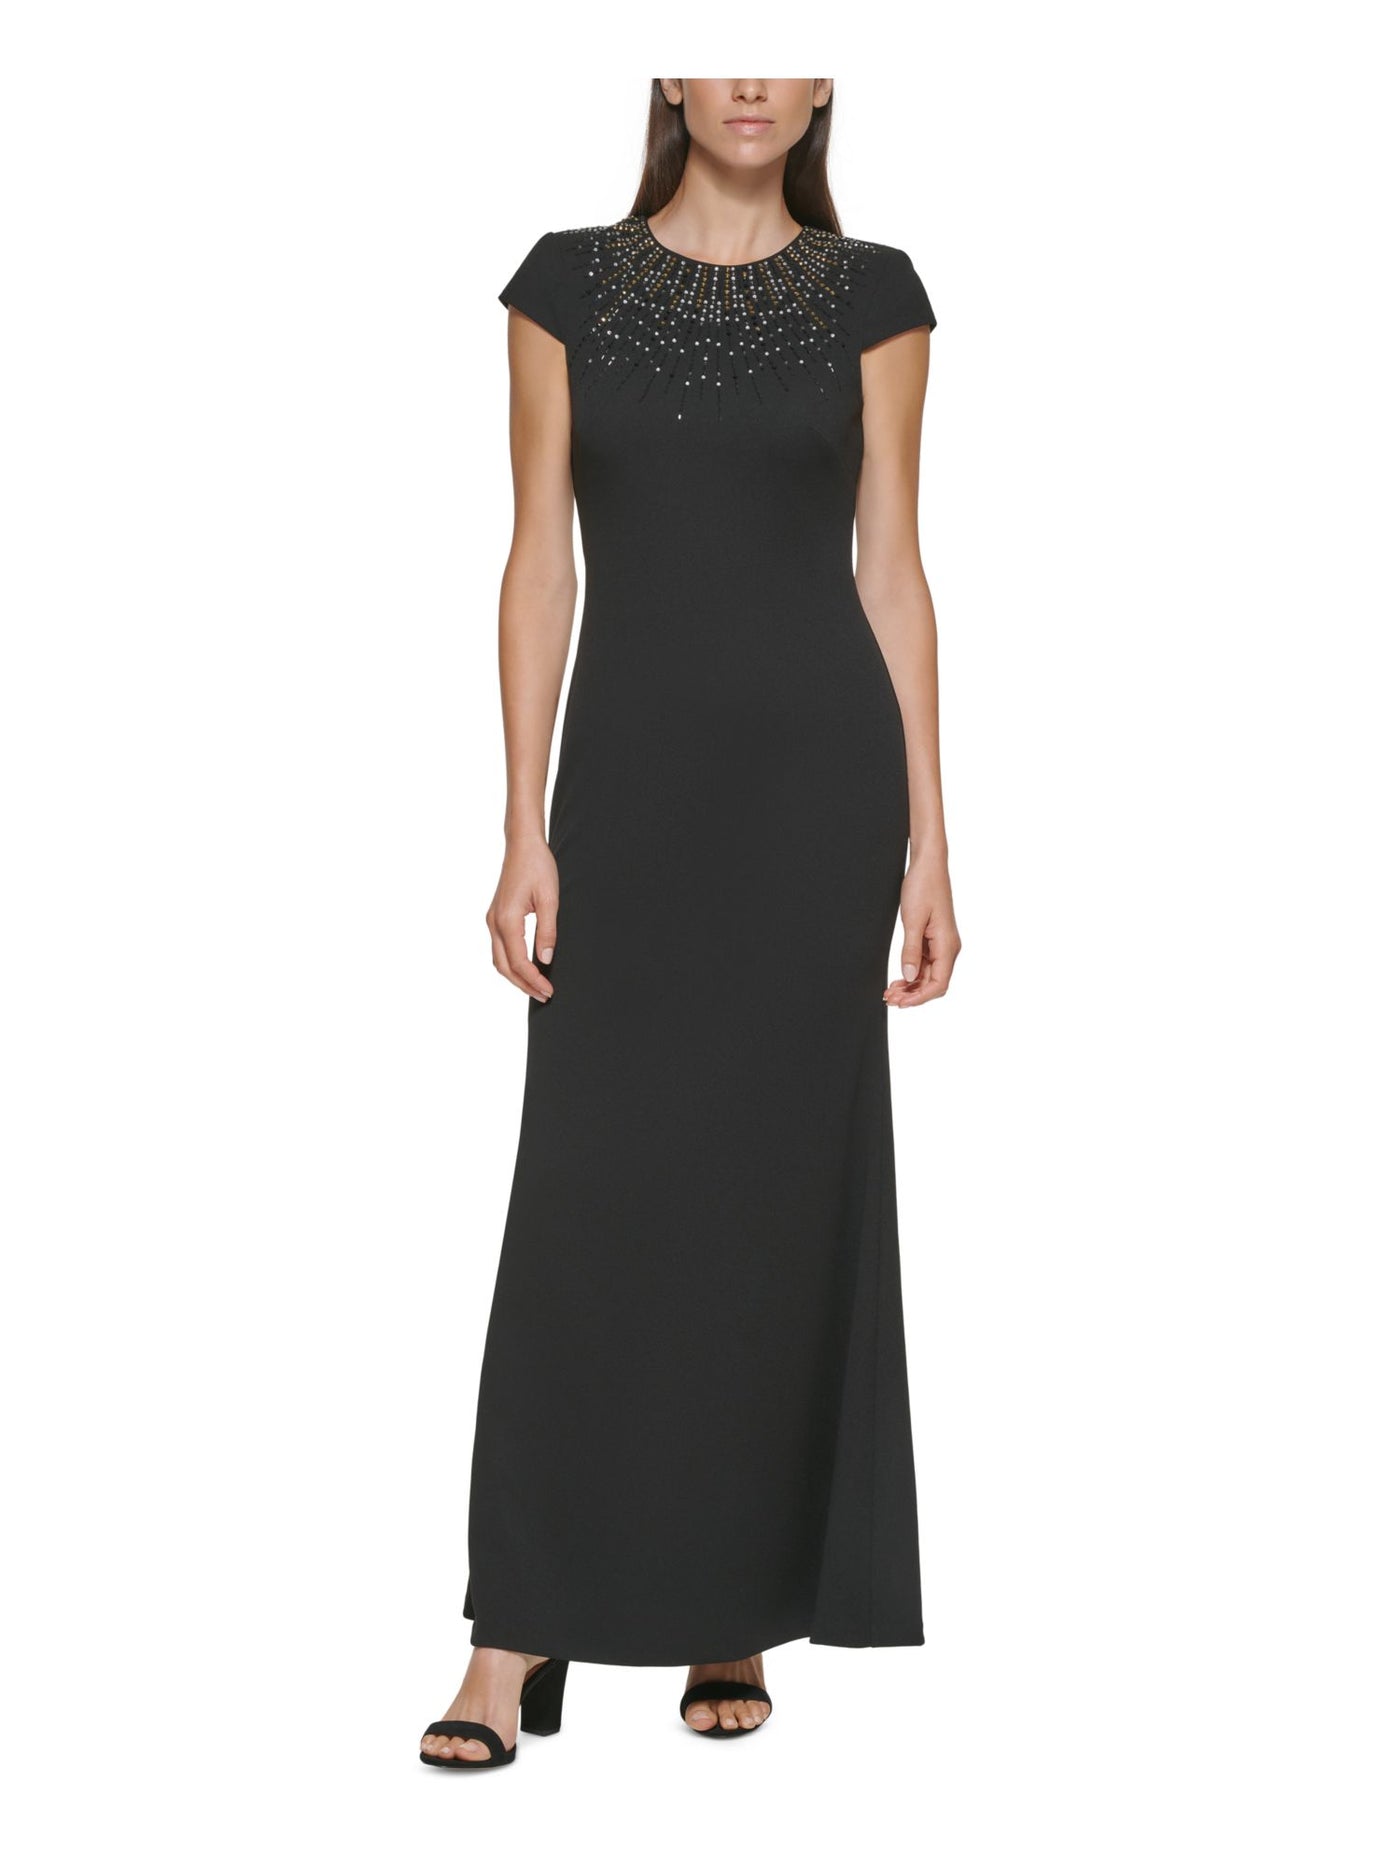 VINCE CAMUTO Womens Stretch Embellished Zippered Lined Cap Sleeve Jewel Neck Full-Length Formal Gown Dress